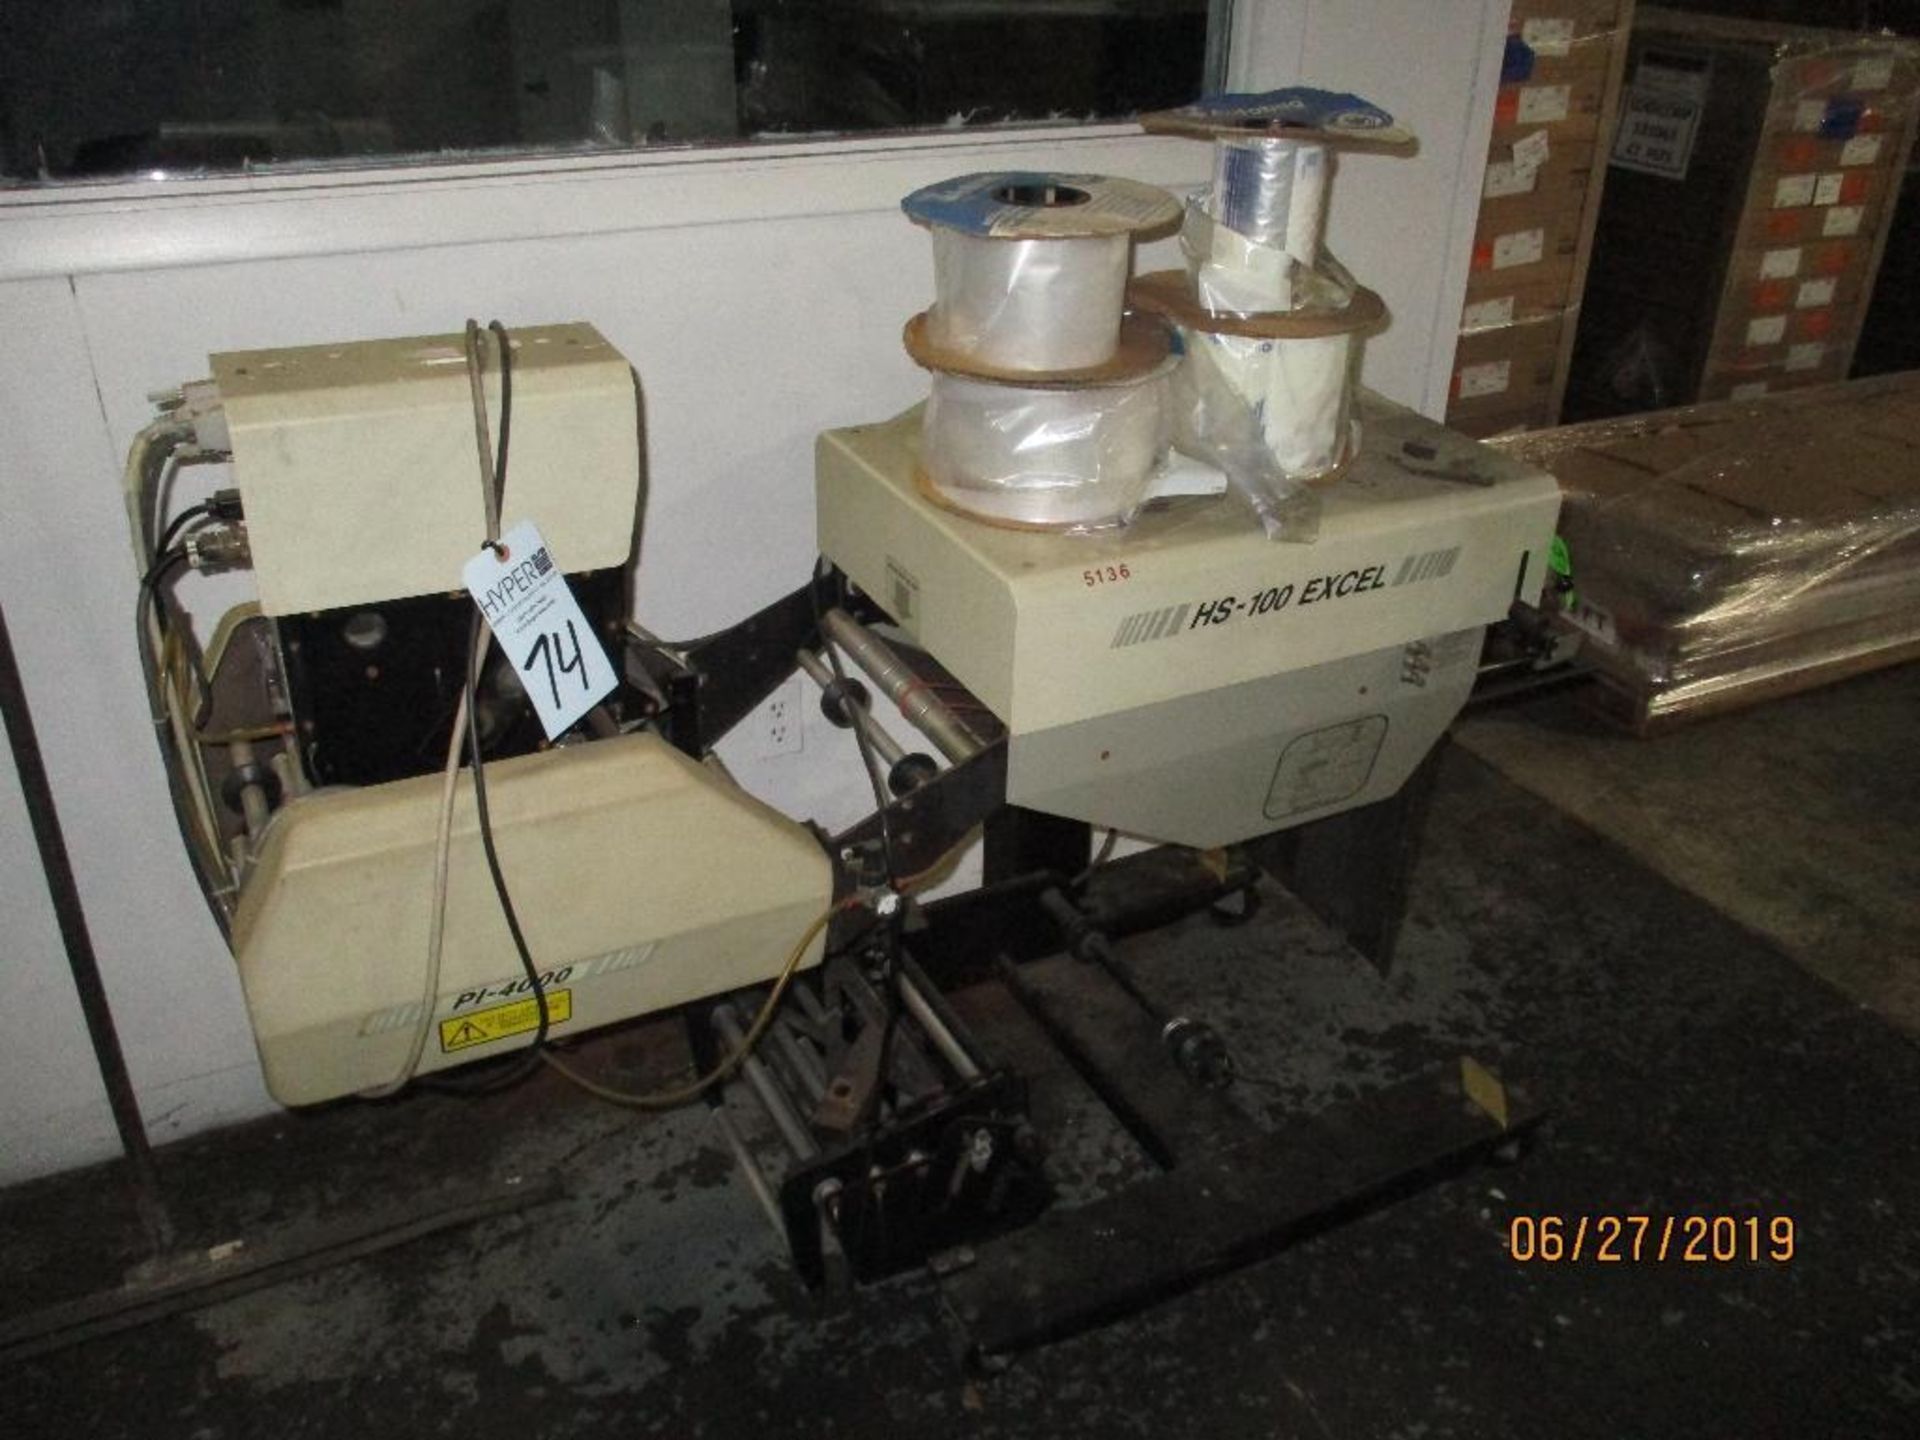 HS-100 Excel Auto Bag Machine S/N 98-12X6-3334 With PI-4000 Auto Label Attached, Located at 800 West